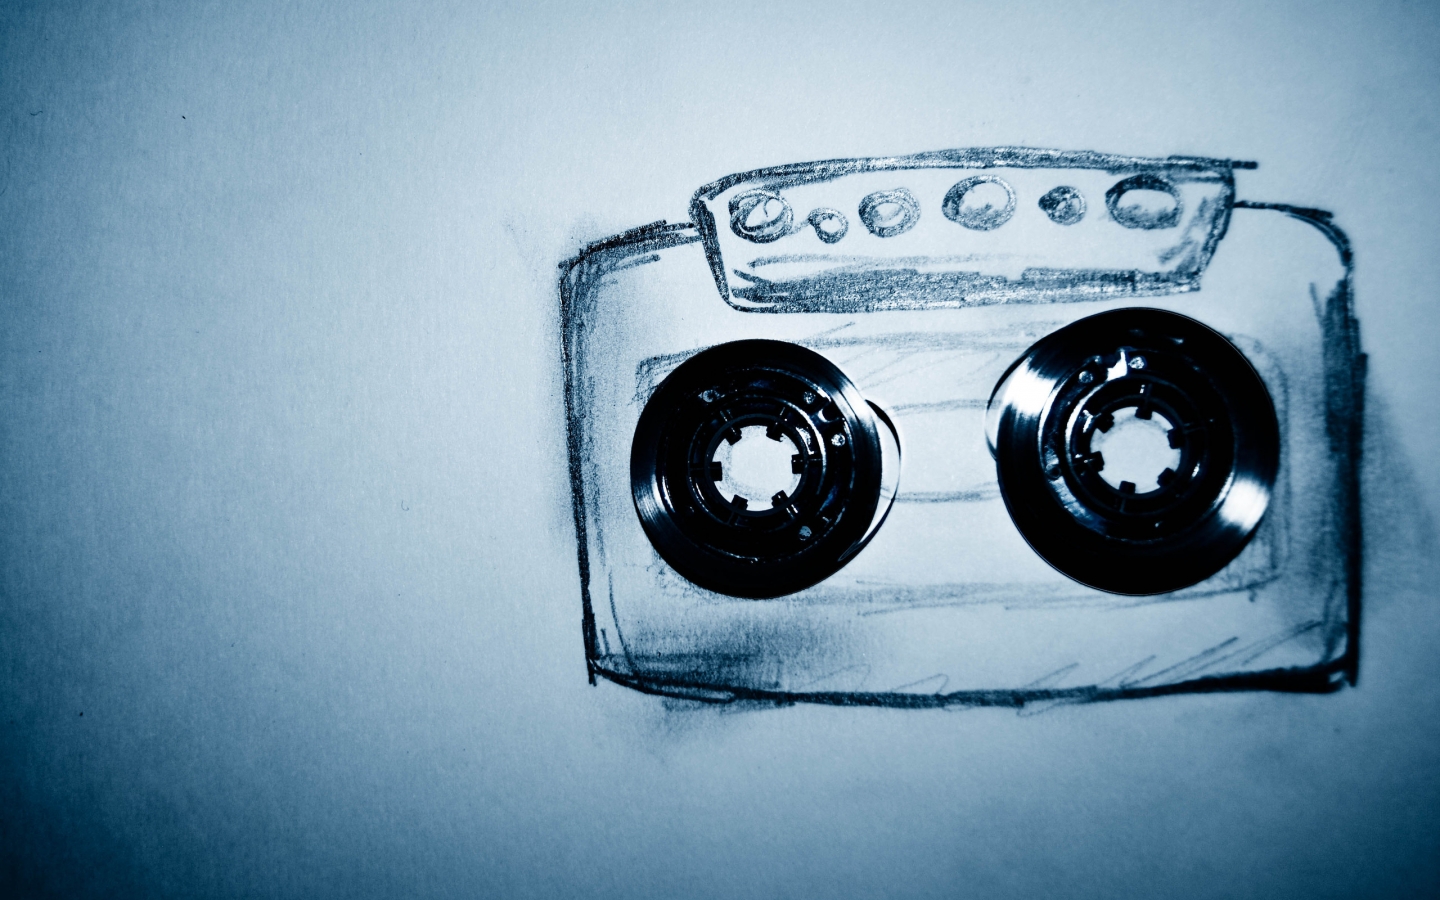 Cassette Drawings for 1440 x 900 widescreen resolution